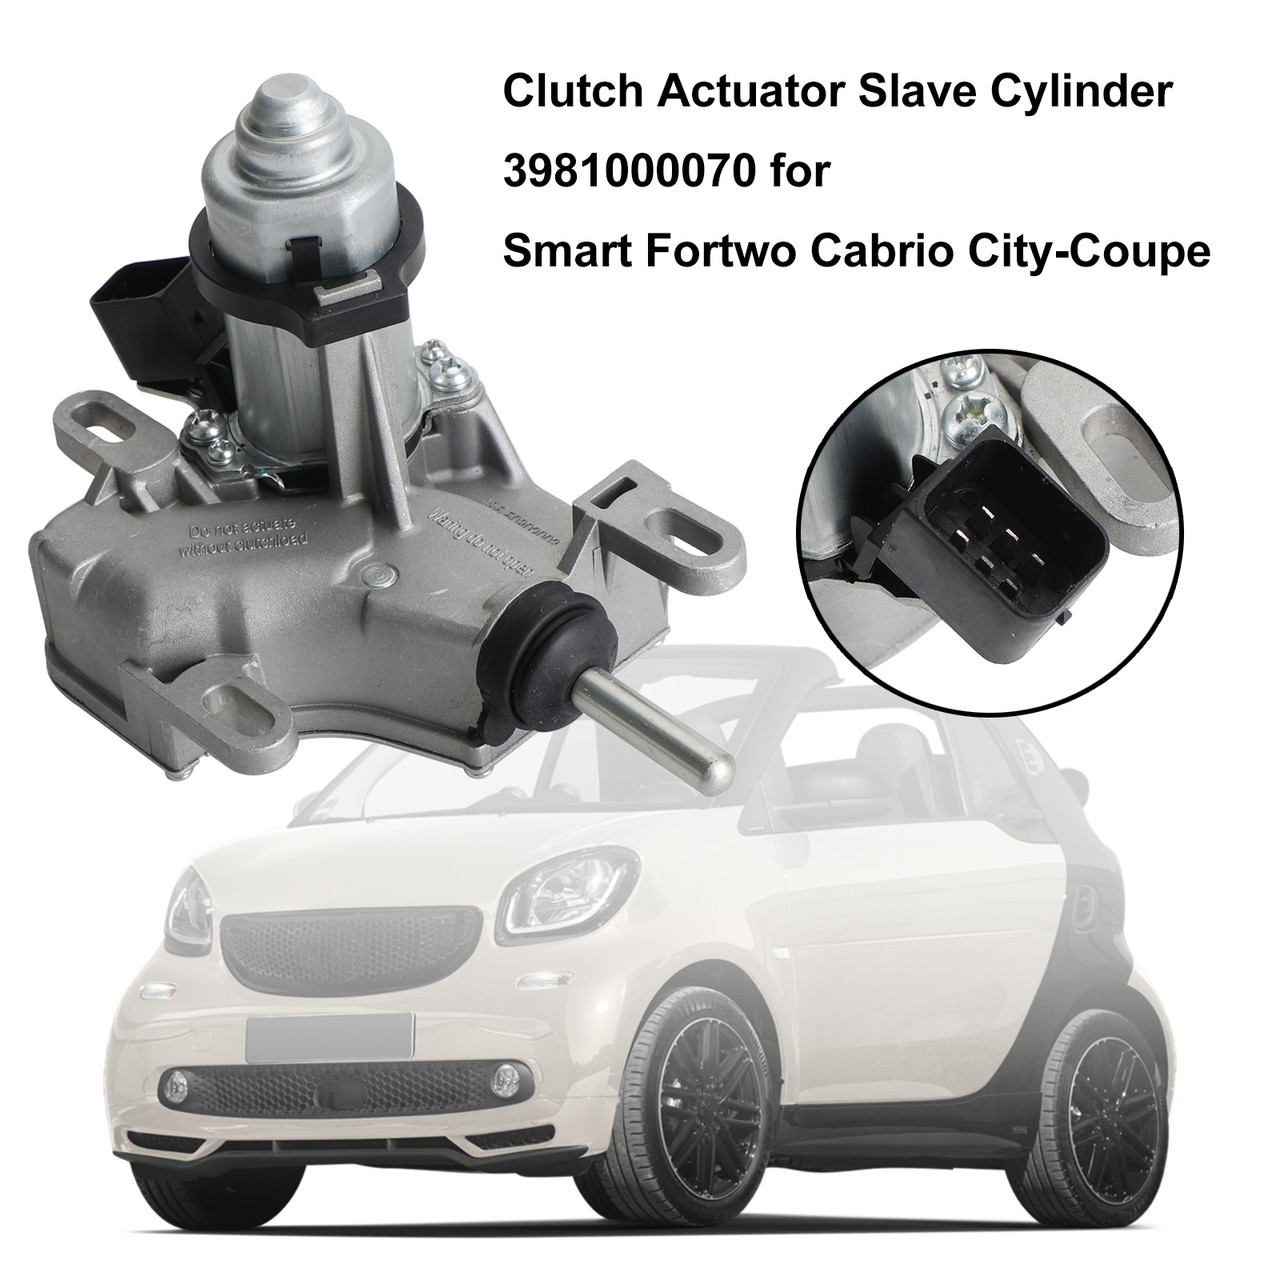 Clutch Actuator Slave Cylinder 3981000070 for Smart Fortwo Cabrio City-Coupe